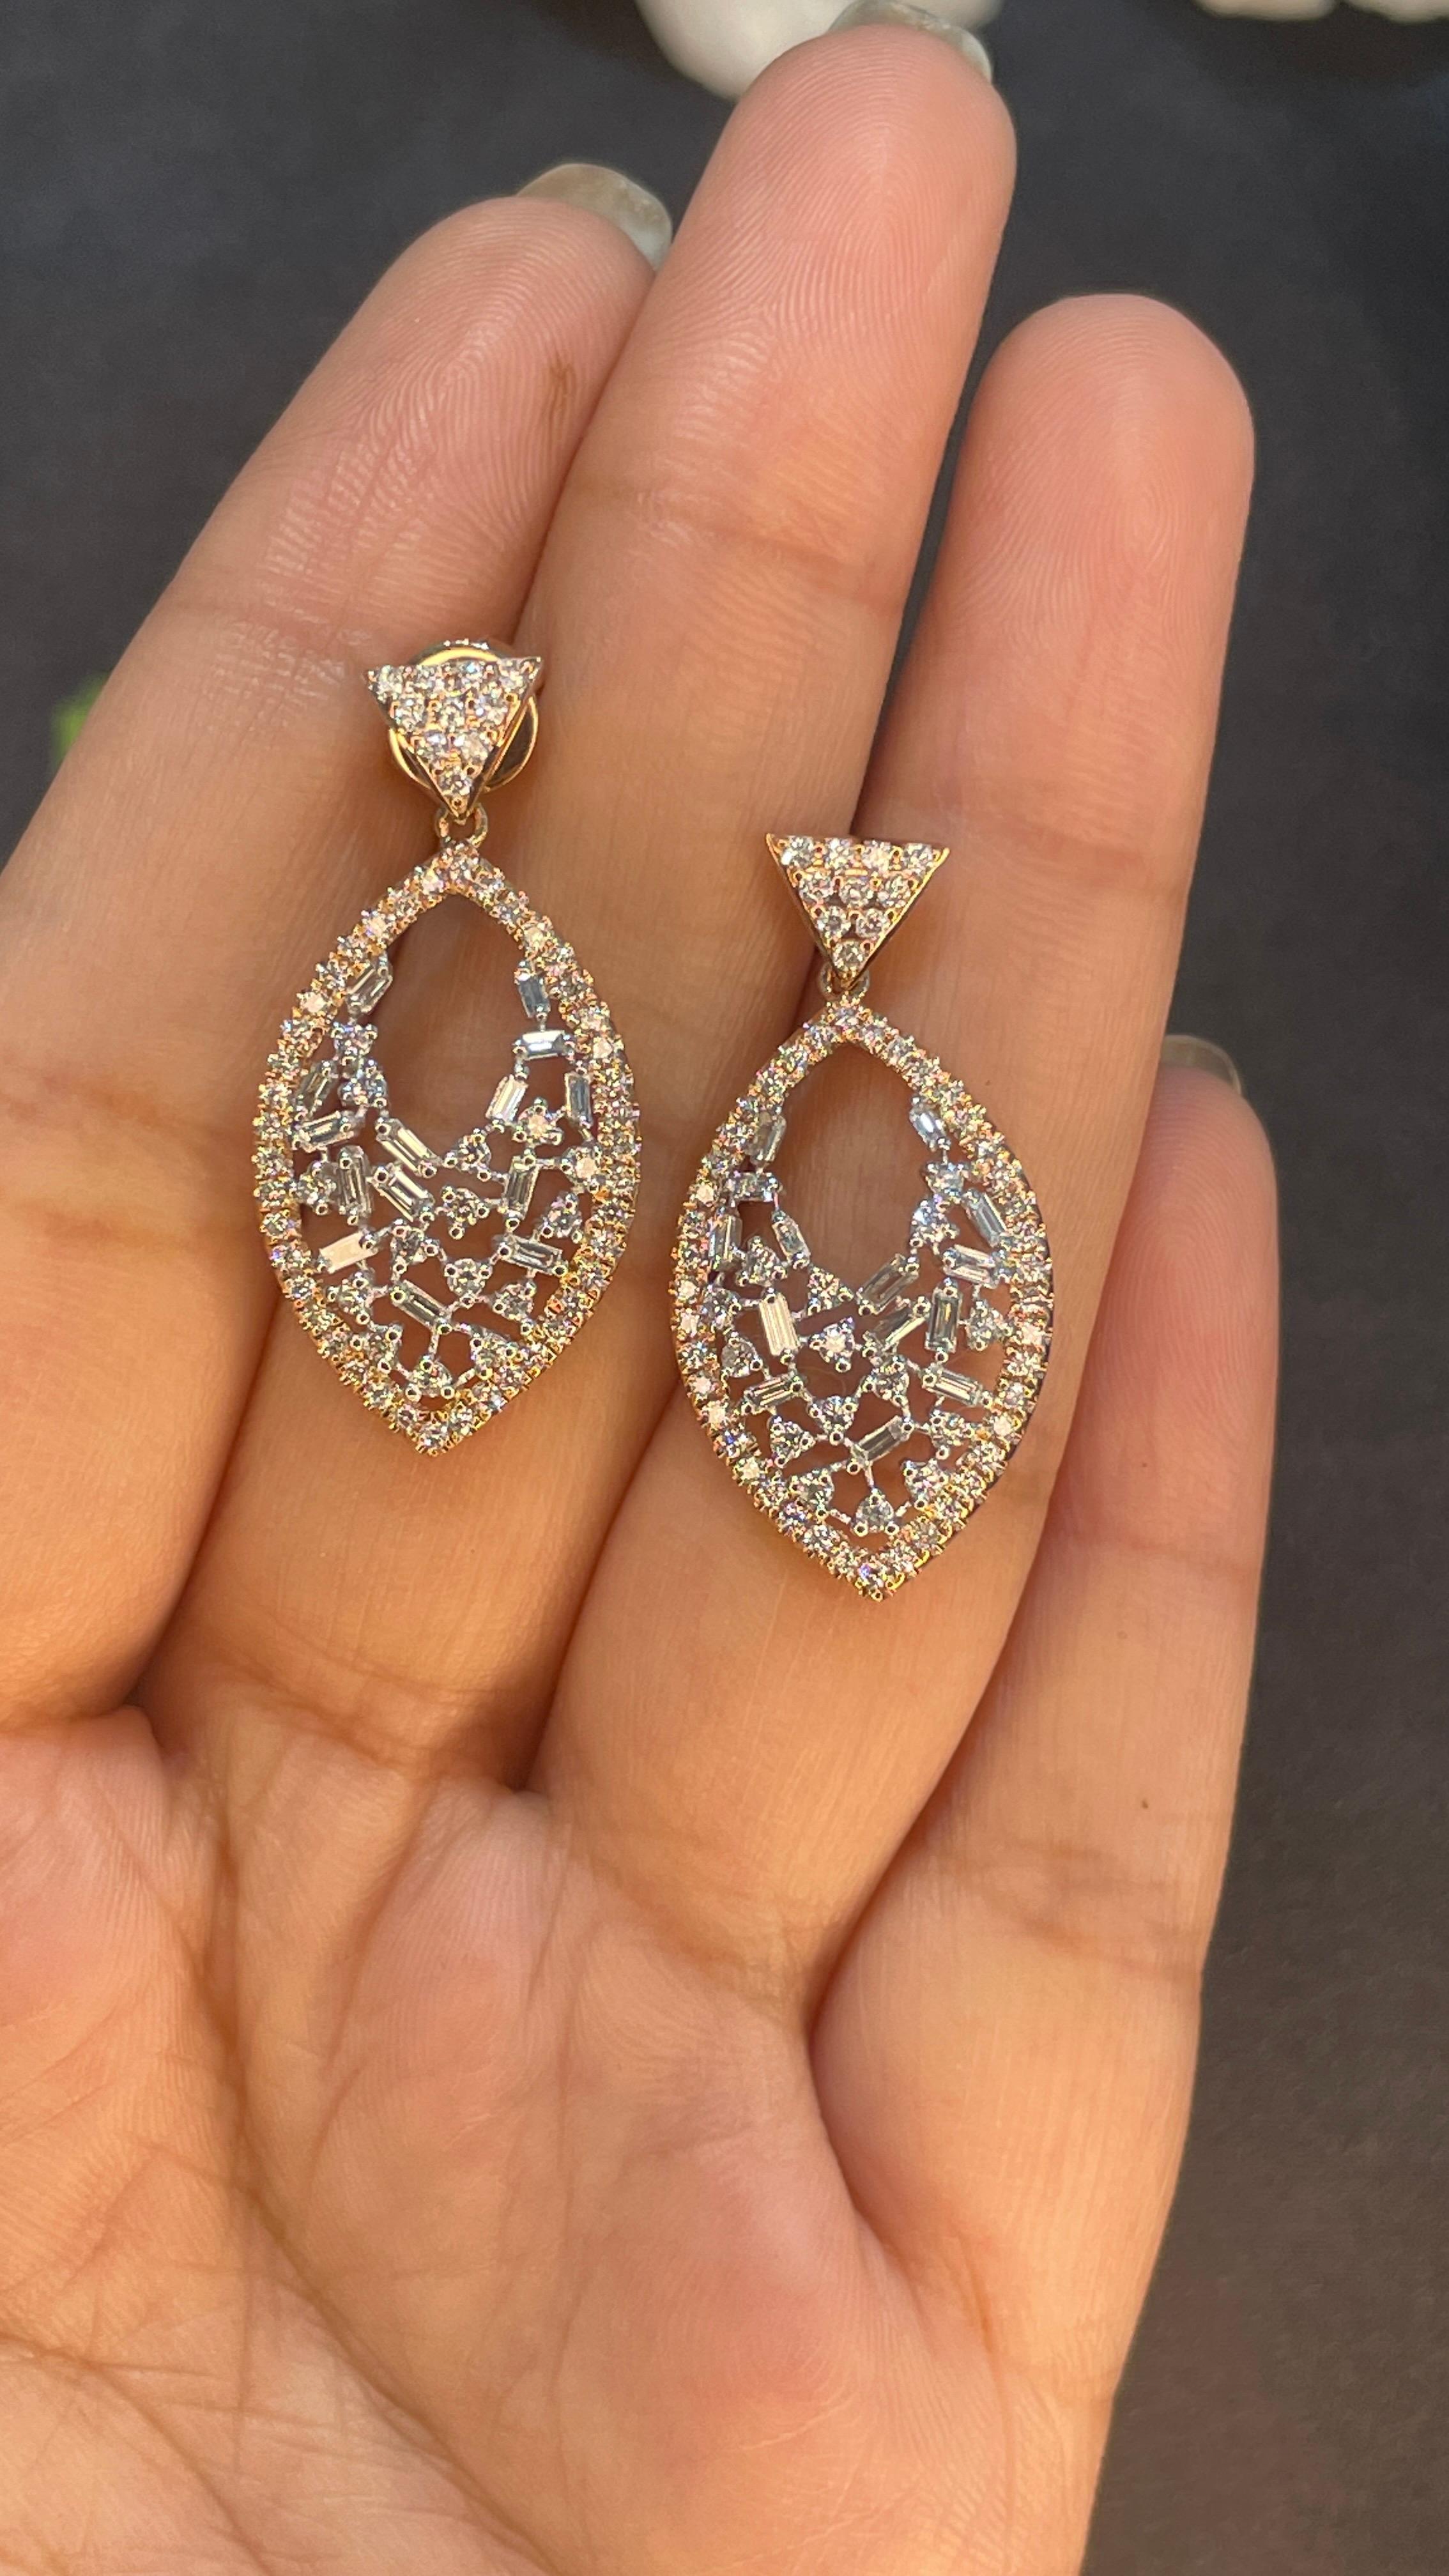 Diamond Fish Dangle Earrings for Women in 14K Gold to make a statement with your look. You shall need dangle earrings to make a statement with your look. These earrings create a sparkling, luxurious look featuring mixed cut diamond.
April birthstone